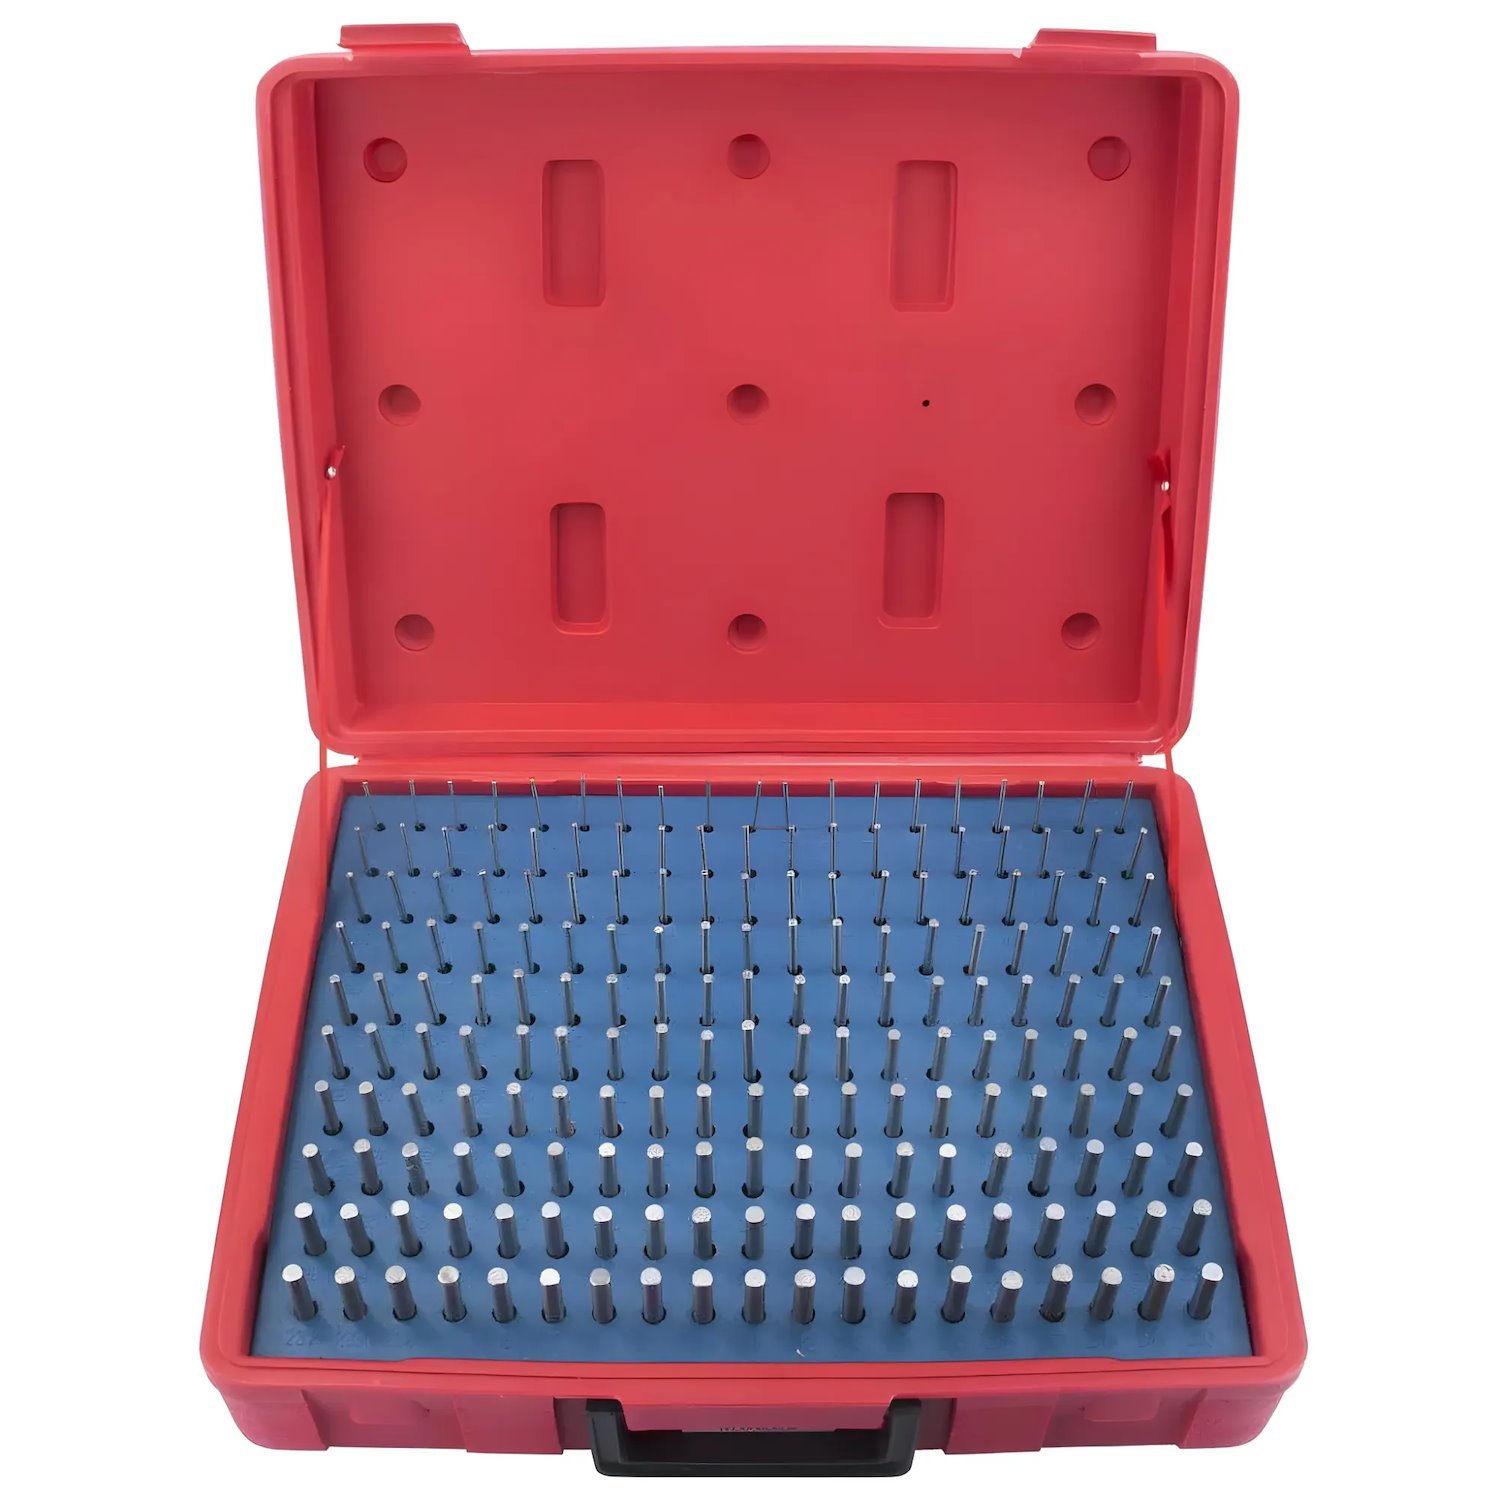 00-56014 Pin Gage Set, Size: .061-.250 in., Set qty: 190, Length: 2 in., Accuracy: +.0000-.0002 in.